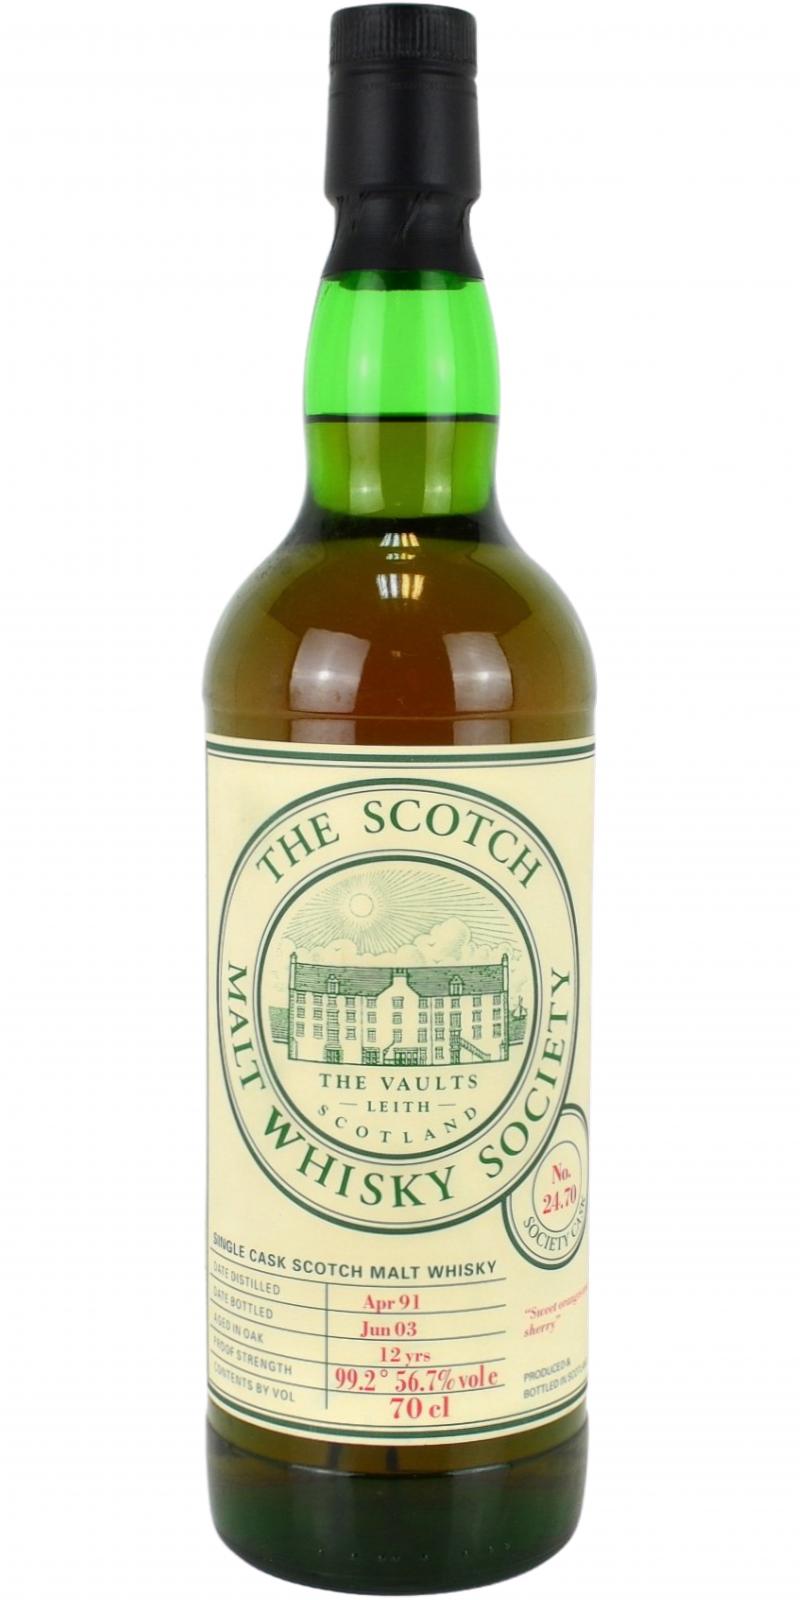 Macallan 1991 SMWS 24.70 Sweet oranges and sherry 24.70 56.7% 700ml